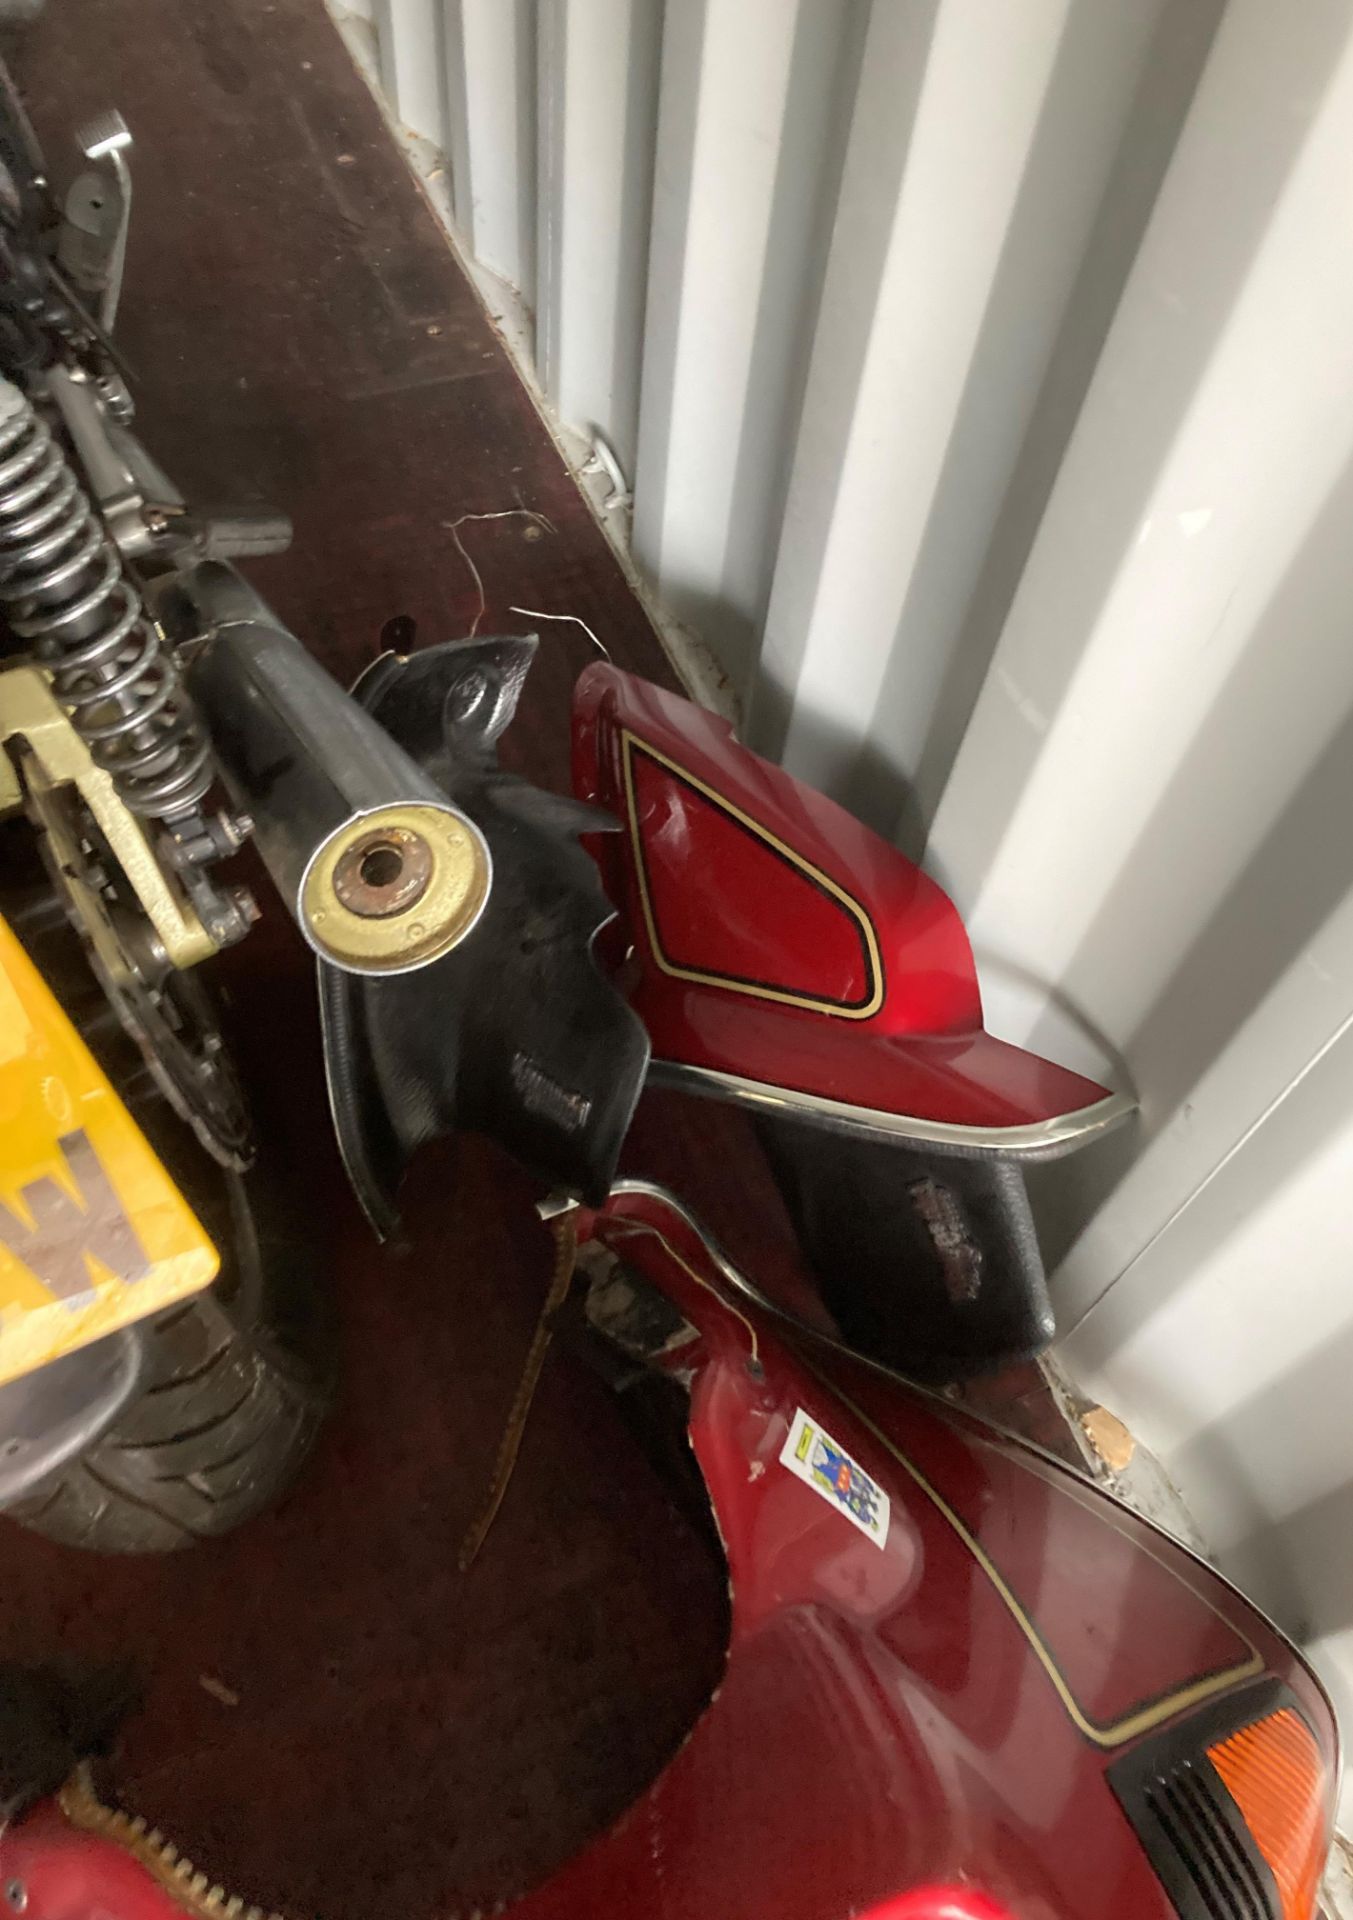 KAWASAKI 1015cc MOTORCYCLE - Petrol - Red. Sold as a project restoration/spares/repairs. - Image 4 of 11